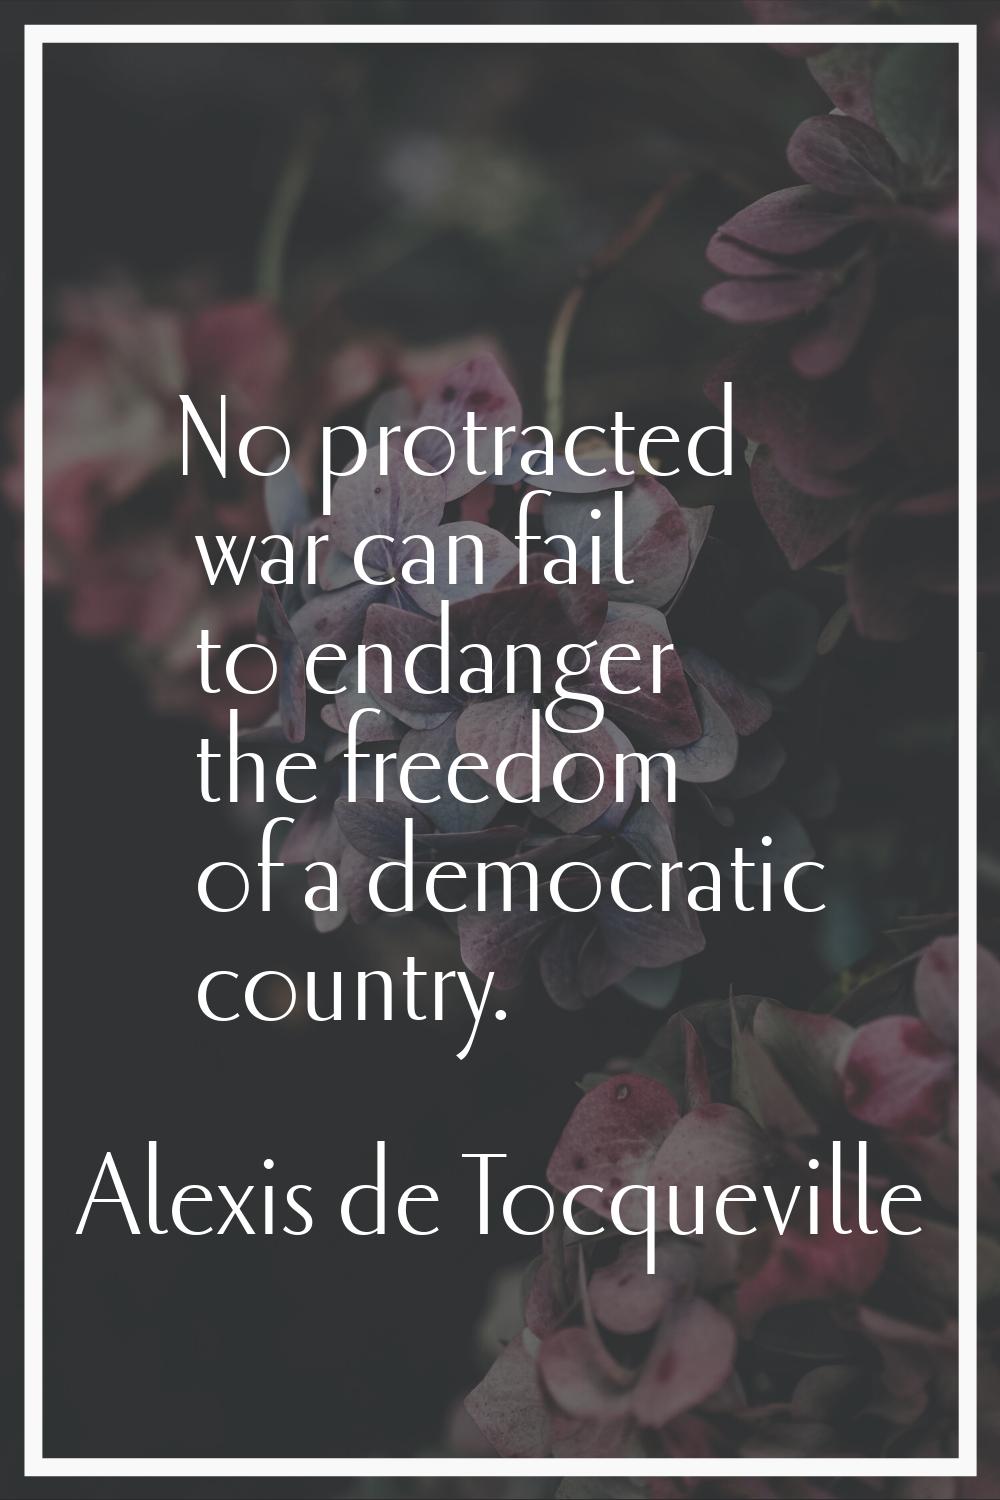 No protracted war can fail to endanger the freedom of a democratic country.